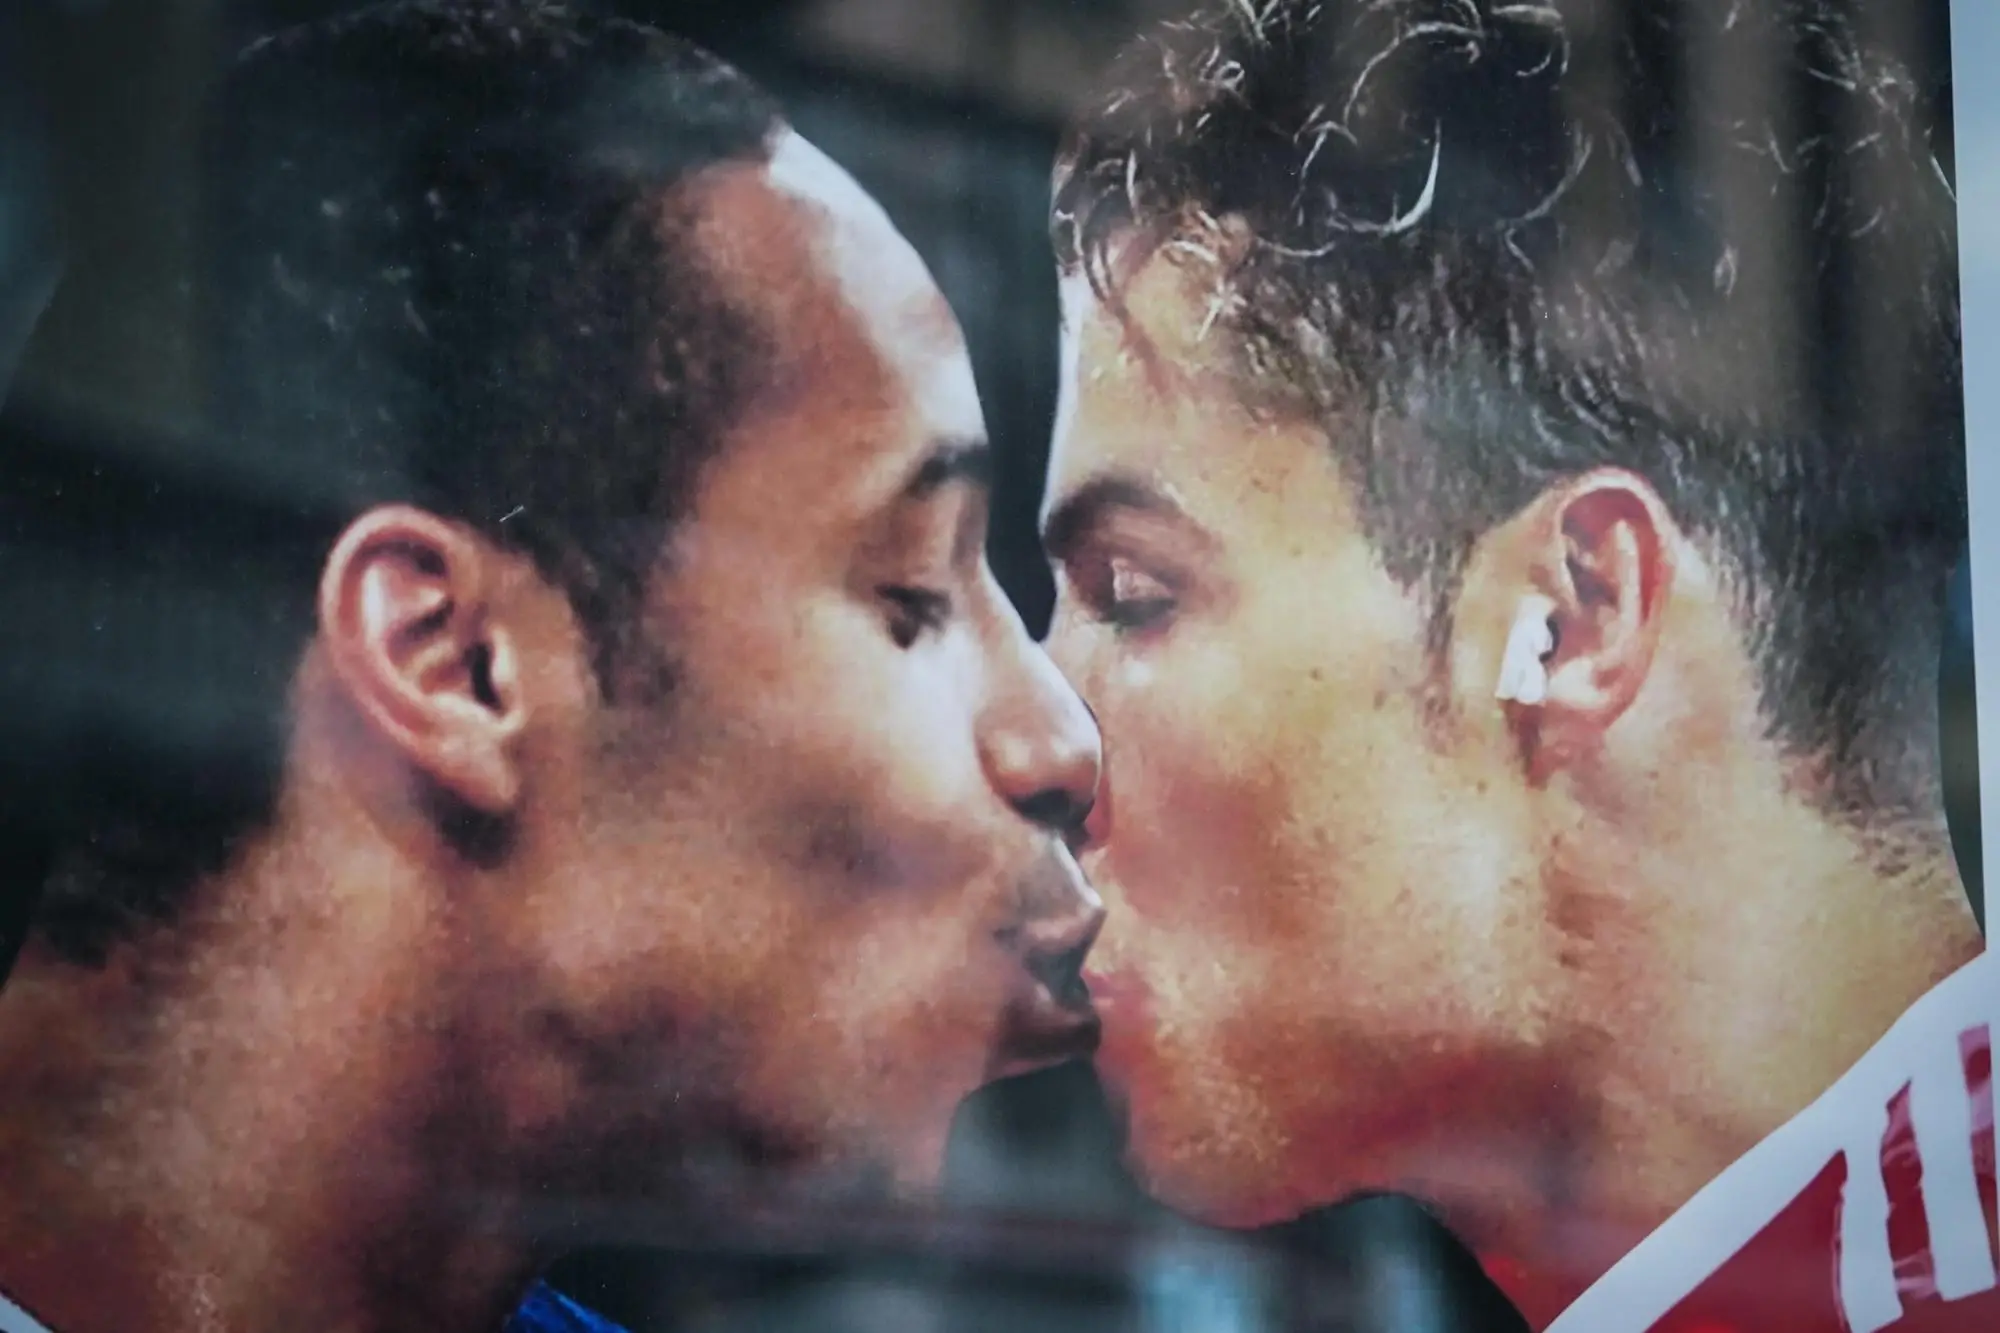 The work of street artist Andrea Villa depicting a kiss between Mbappé and Cristiano Ronaldo against homophobia in football (Ansa/Romano)